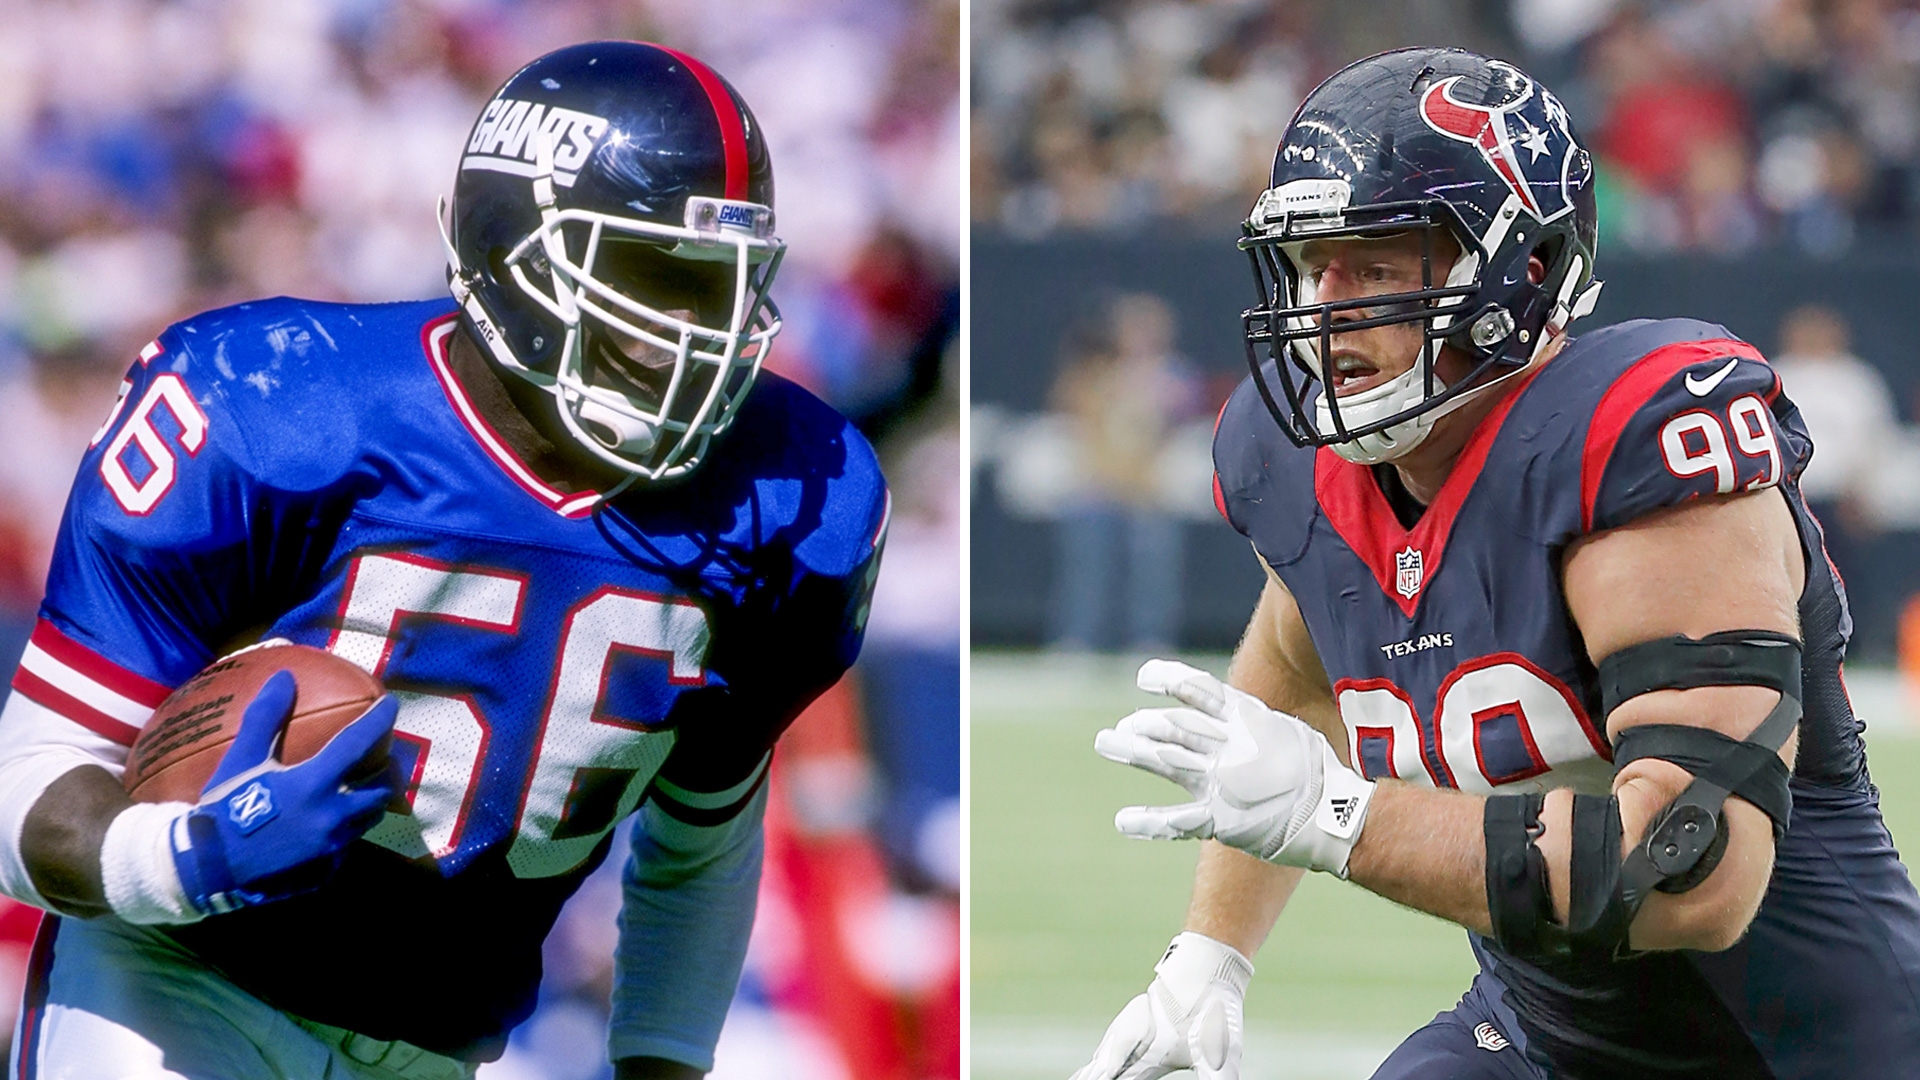 No, it's not too early to compare J.J. Watt to Lawrence Taylor, all-time greats